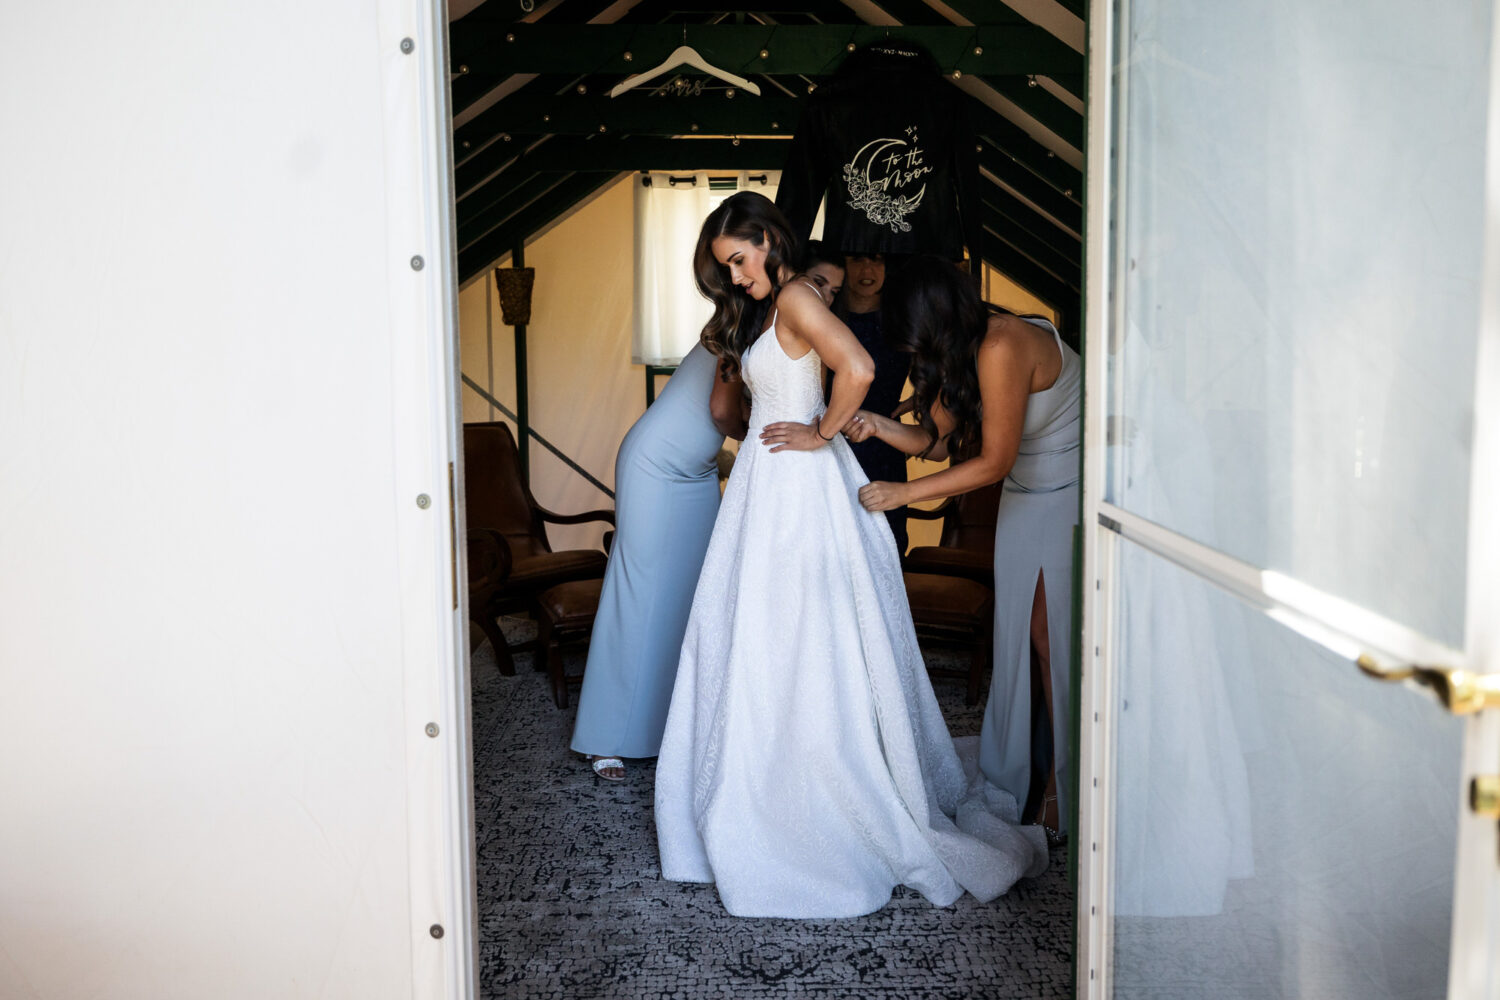 Bride getting ready in the small white tent cabin at Dancing Pines.